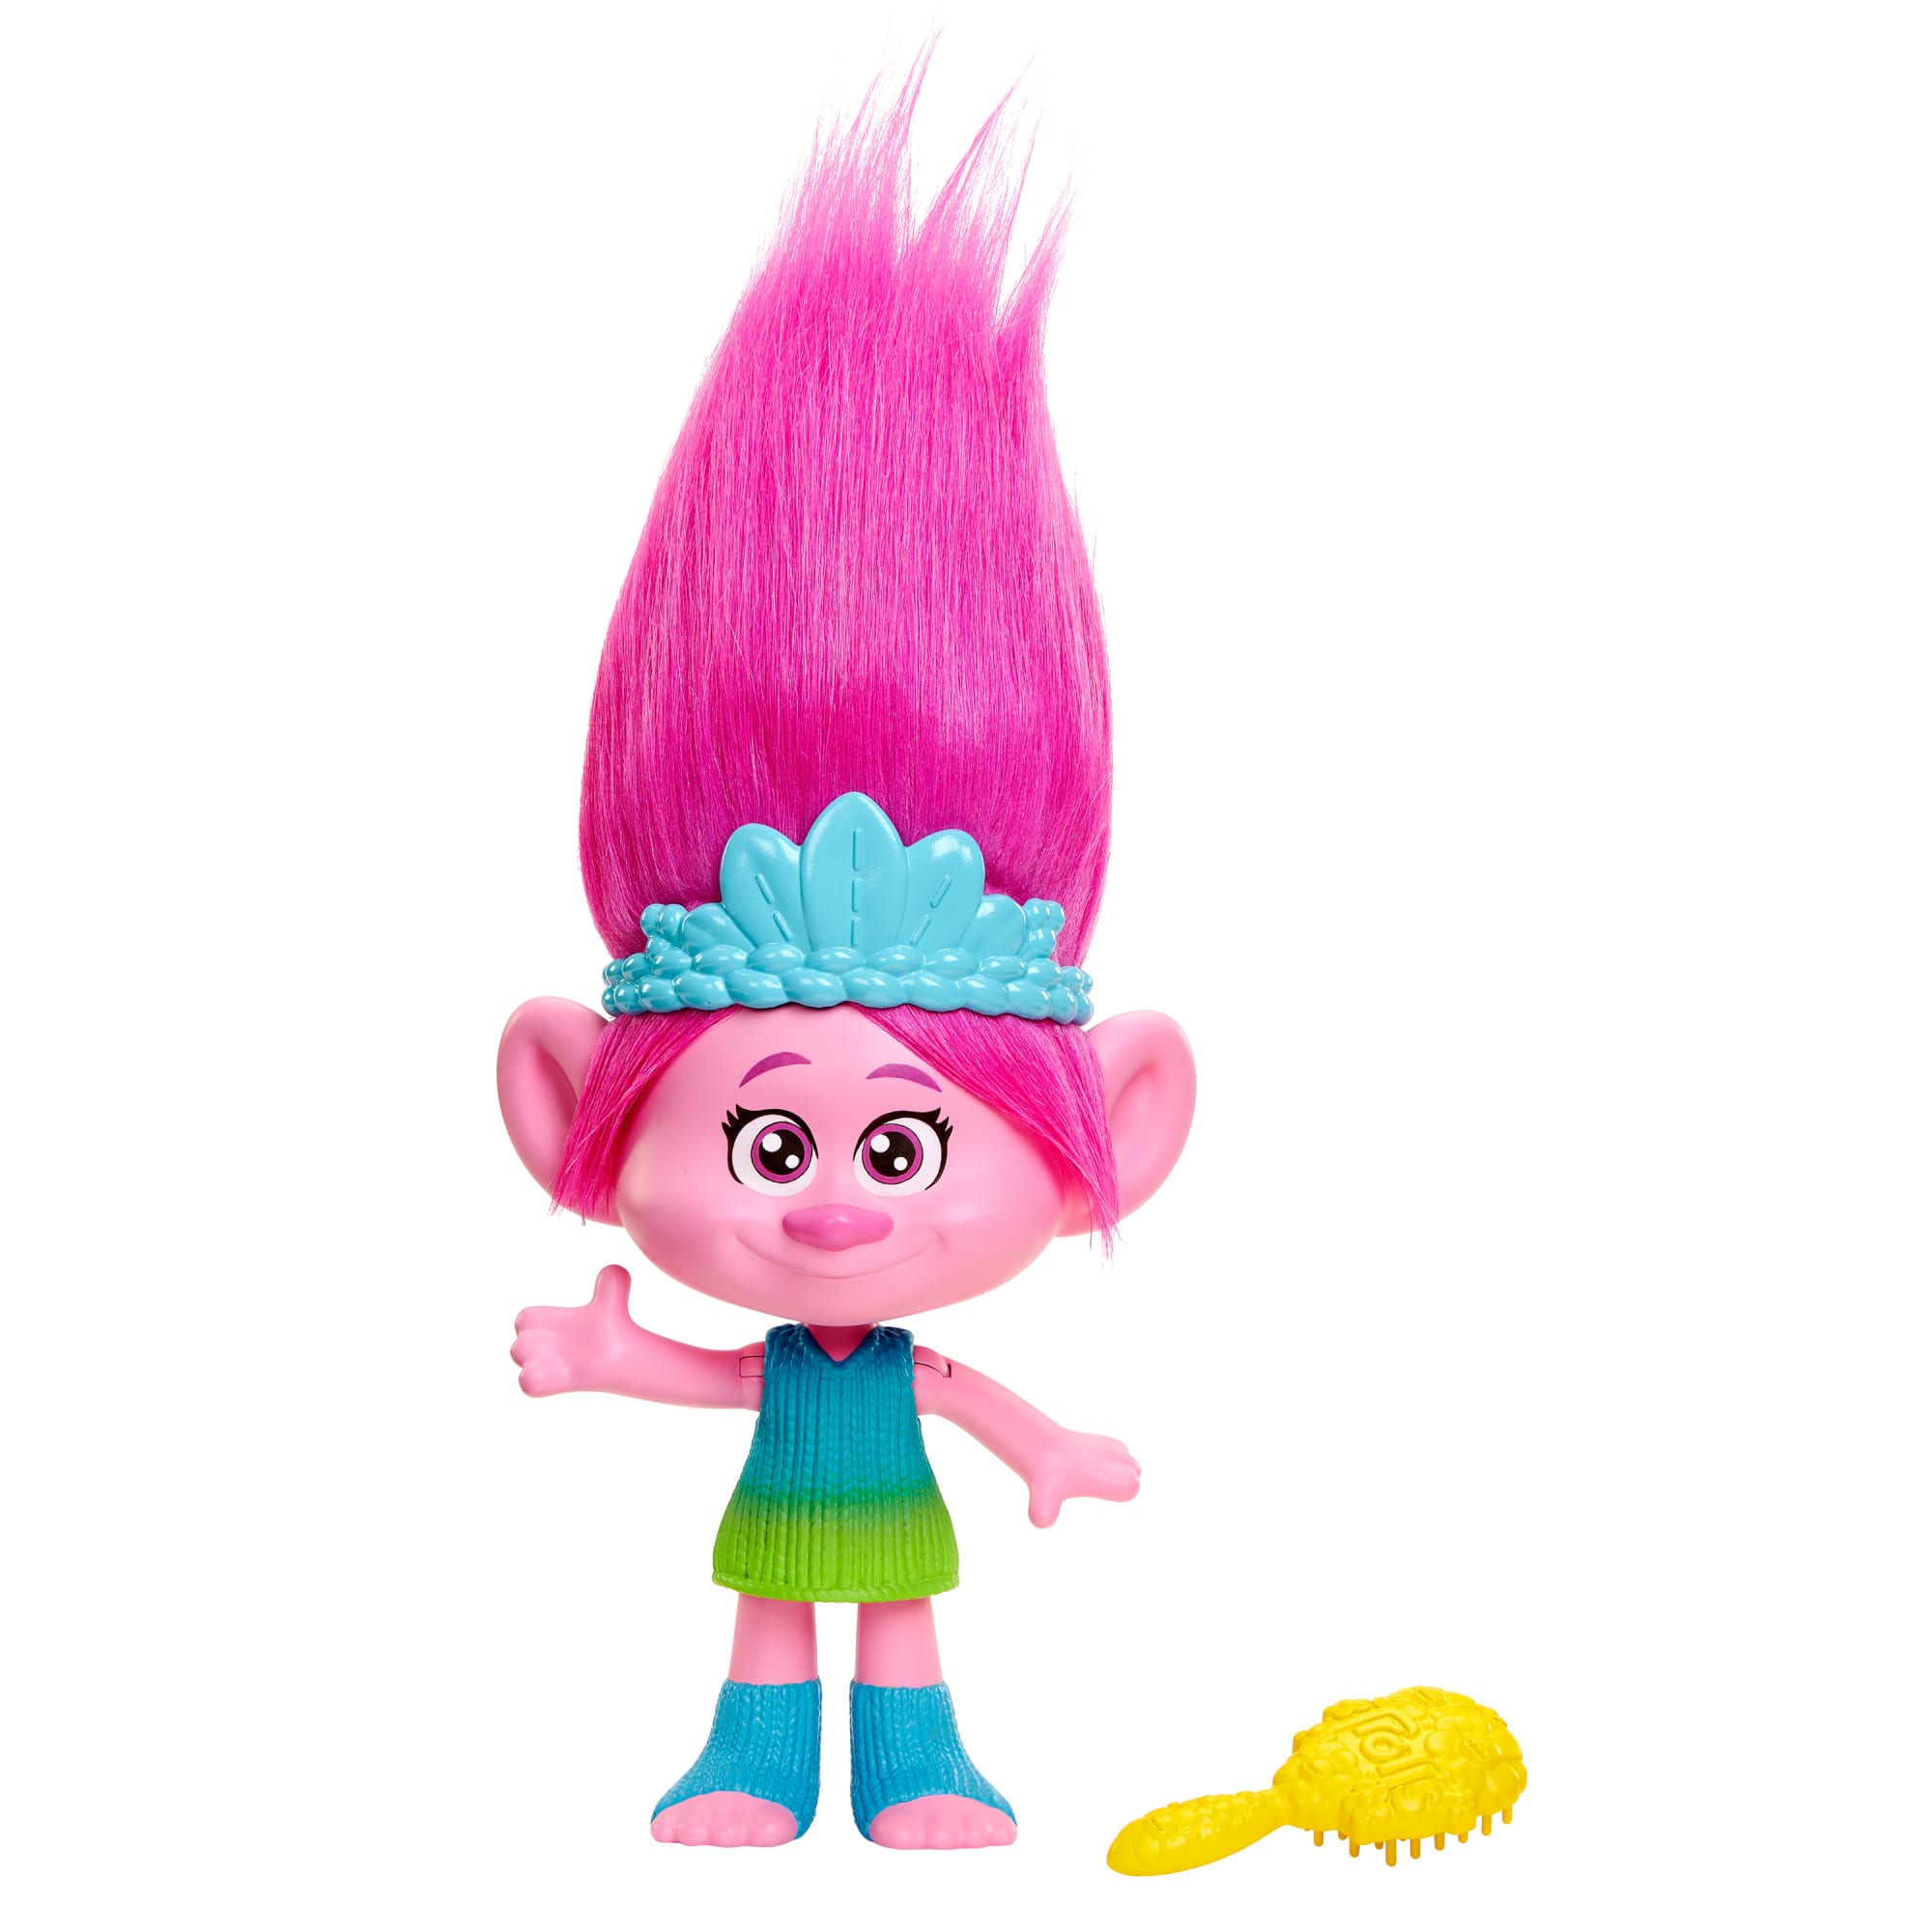 Polly Pocket & DreamWorks Trolls Compact Playset with Poppy & Branch Dolls  & 13 Accessories